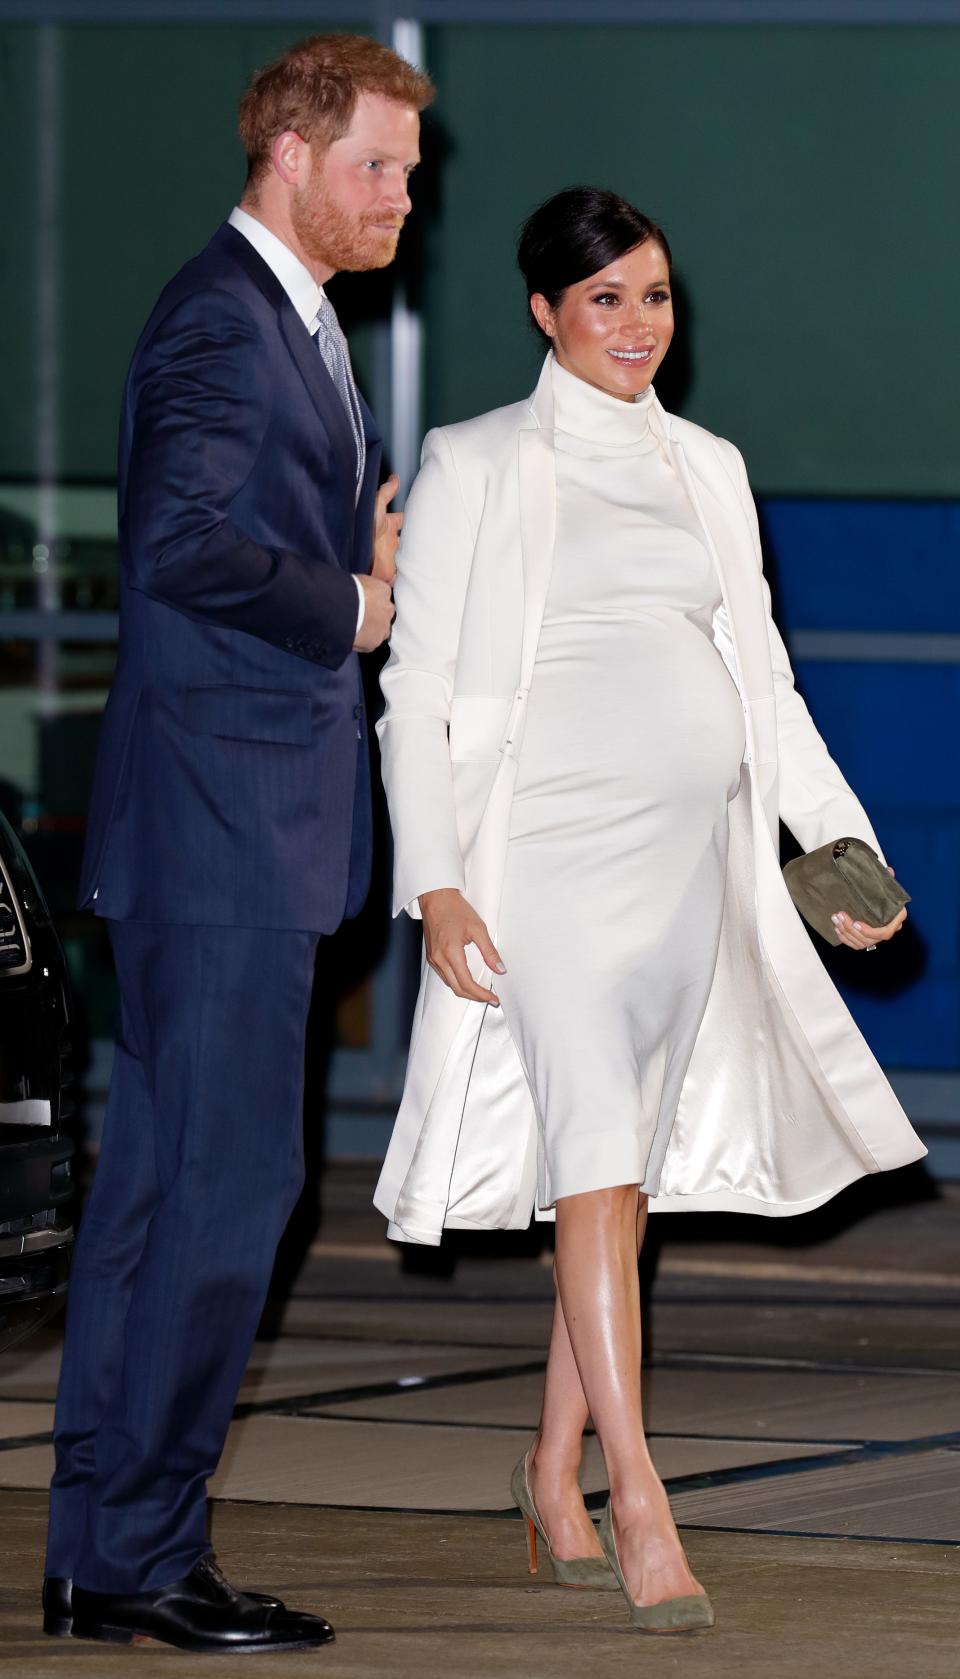 Harry in a navy suit and Meghan pregnant in a snug white turtleneck knee length dress and matching flowy coat.